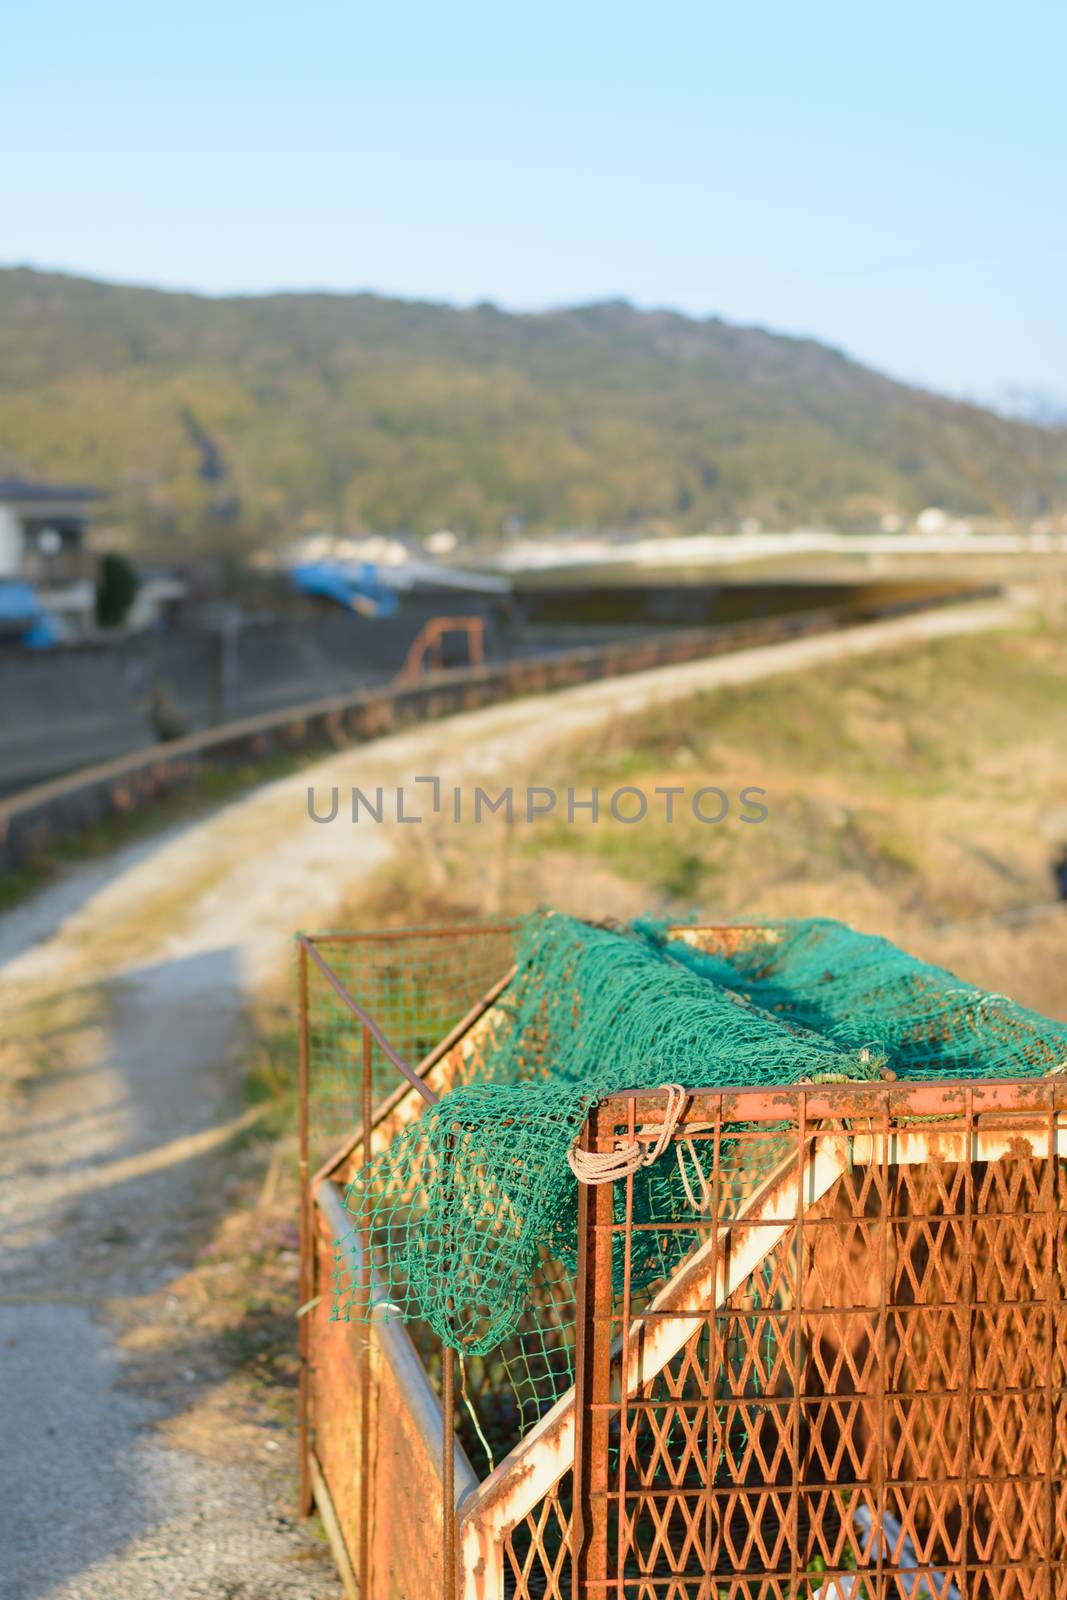 A rusty container for garbage next to a dirt path following the curve of a river with mountains in the background. In the countryside of Kochi, Japan.